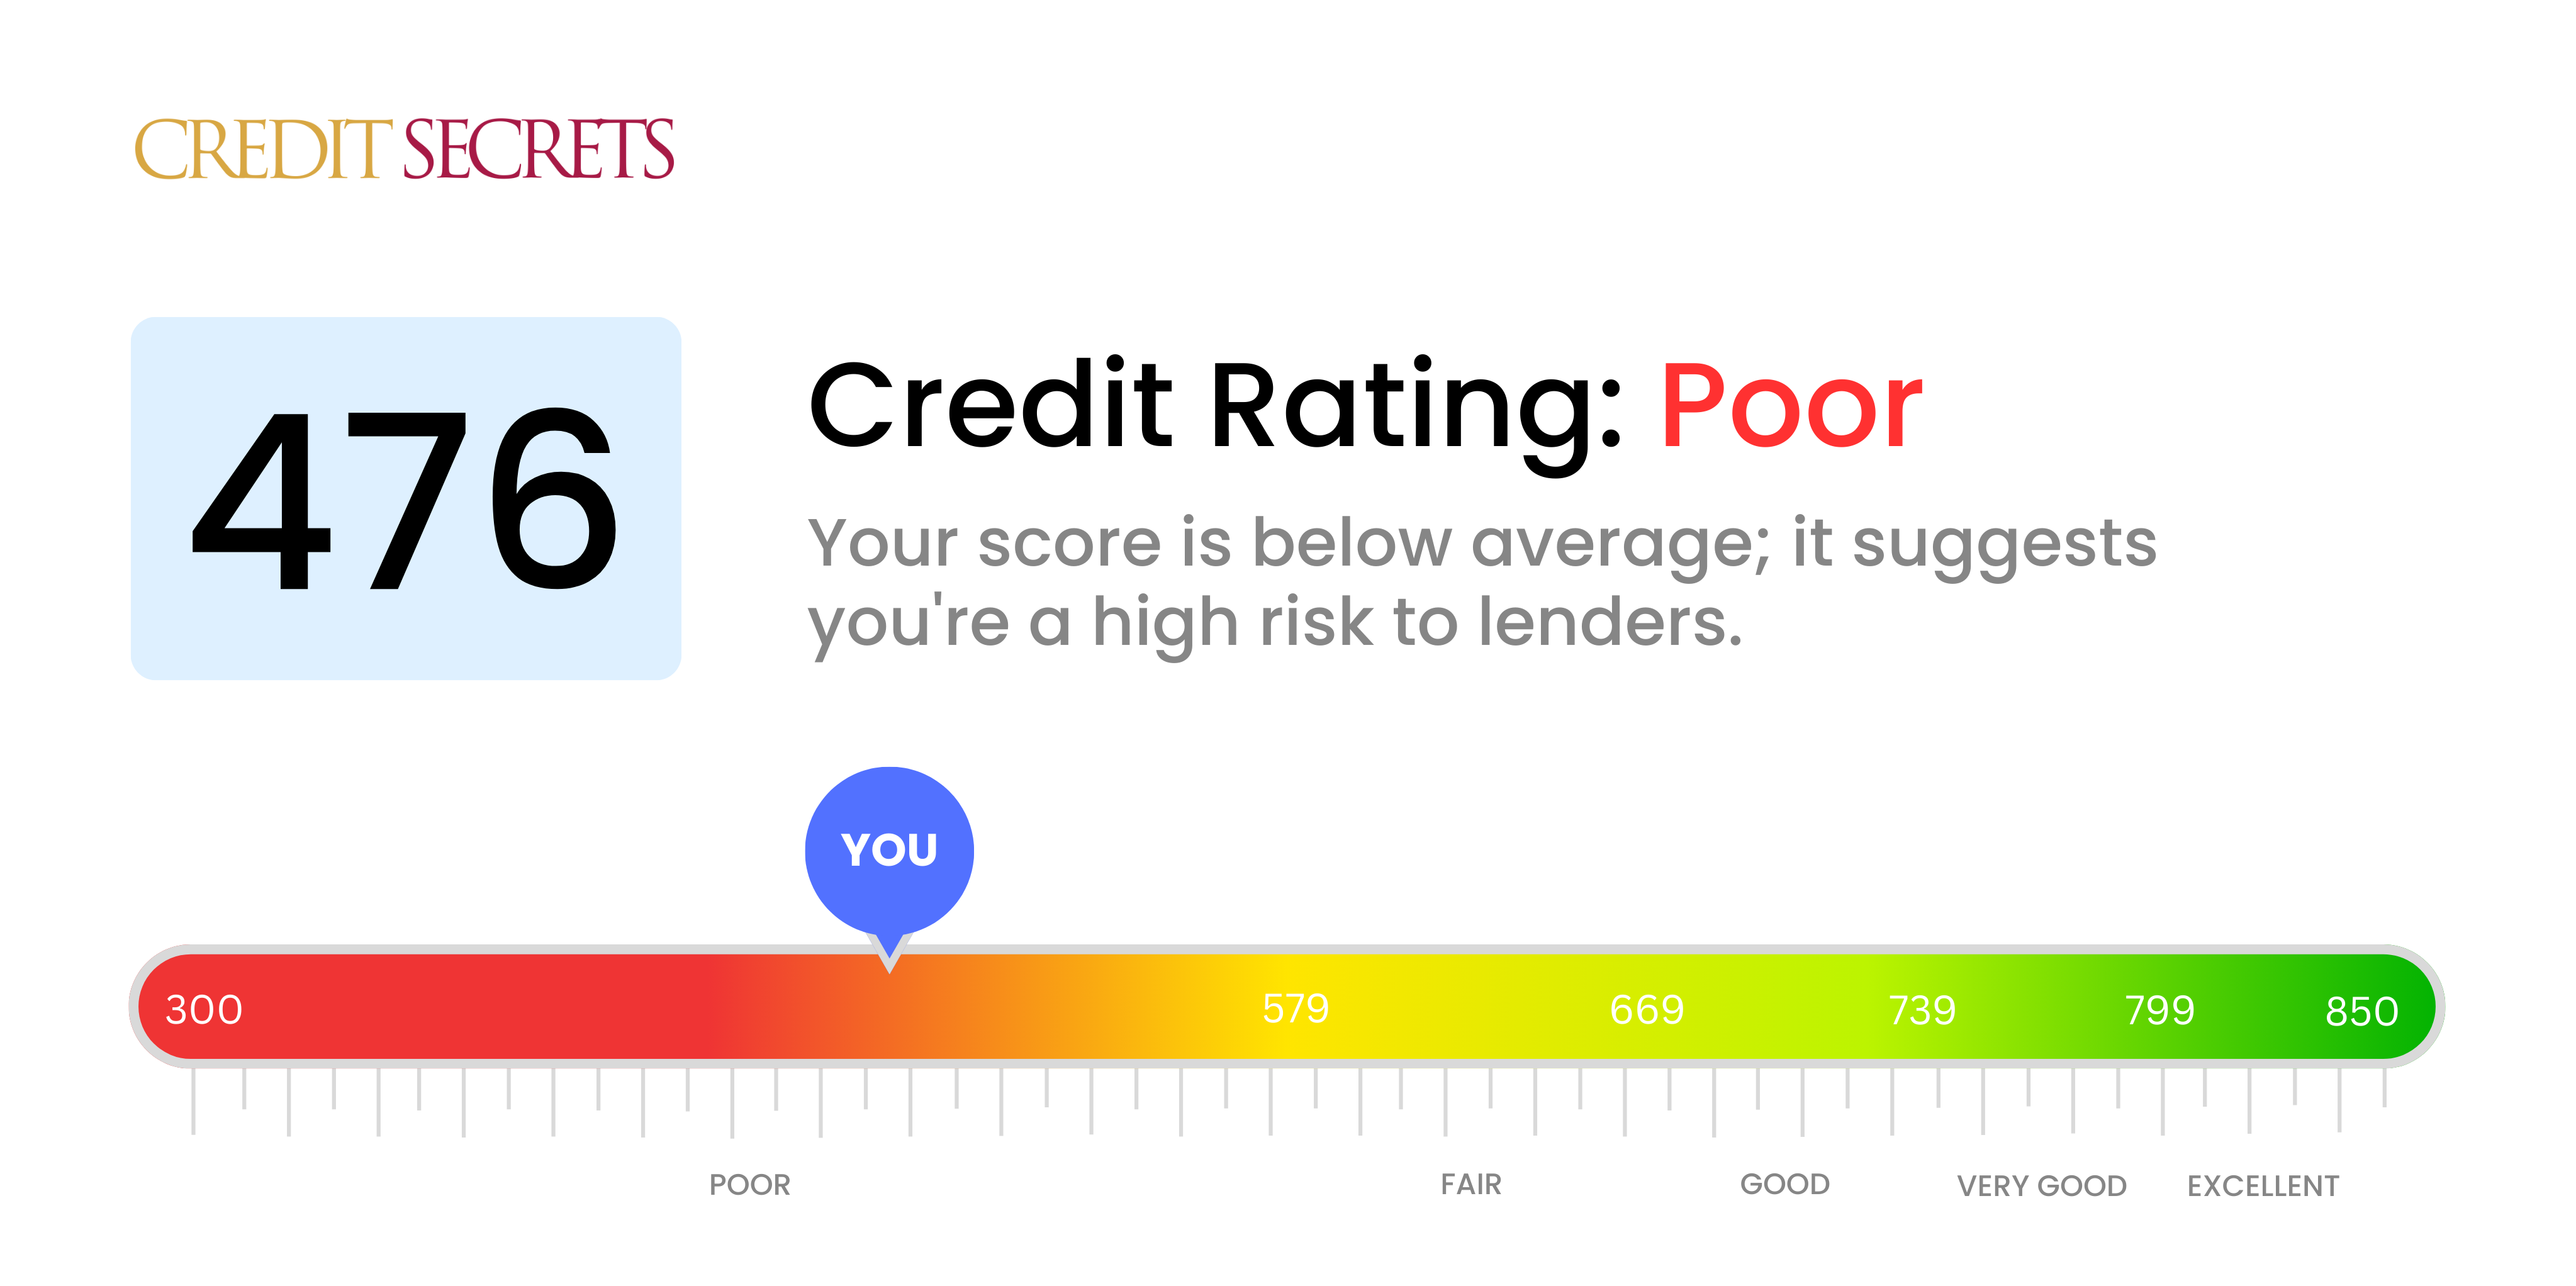 Is 476 a good credit score?